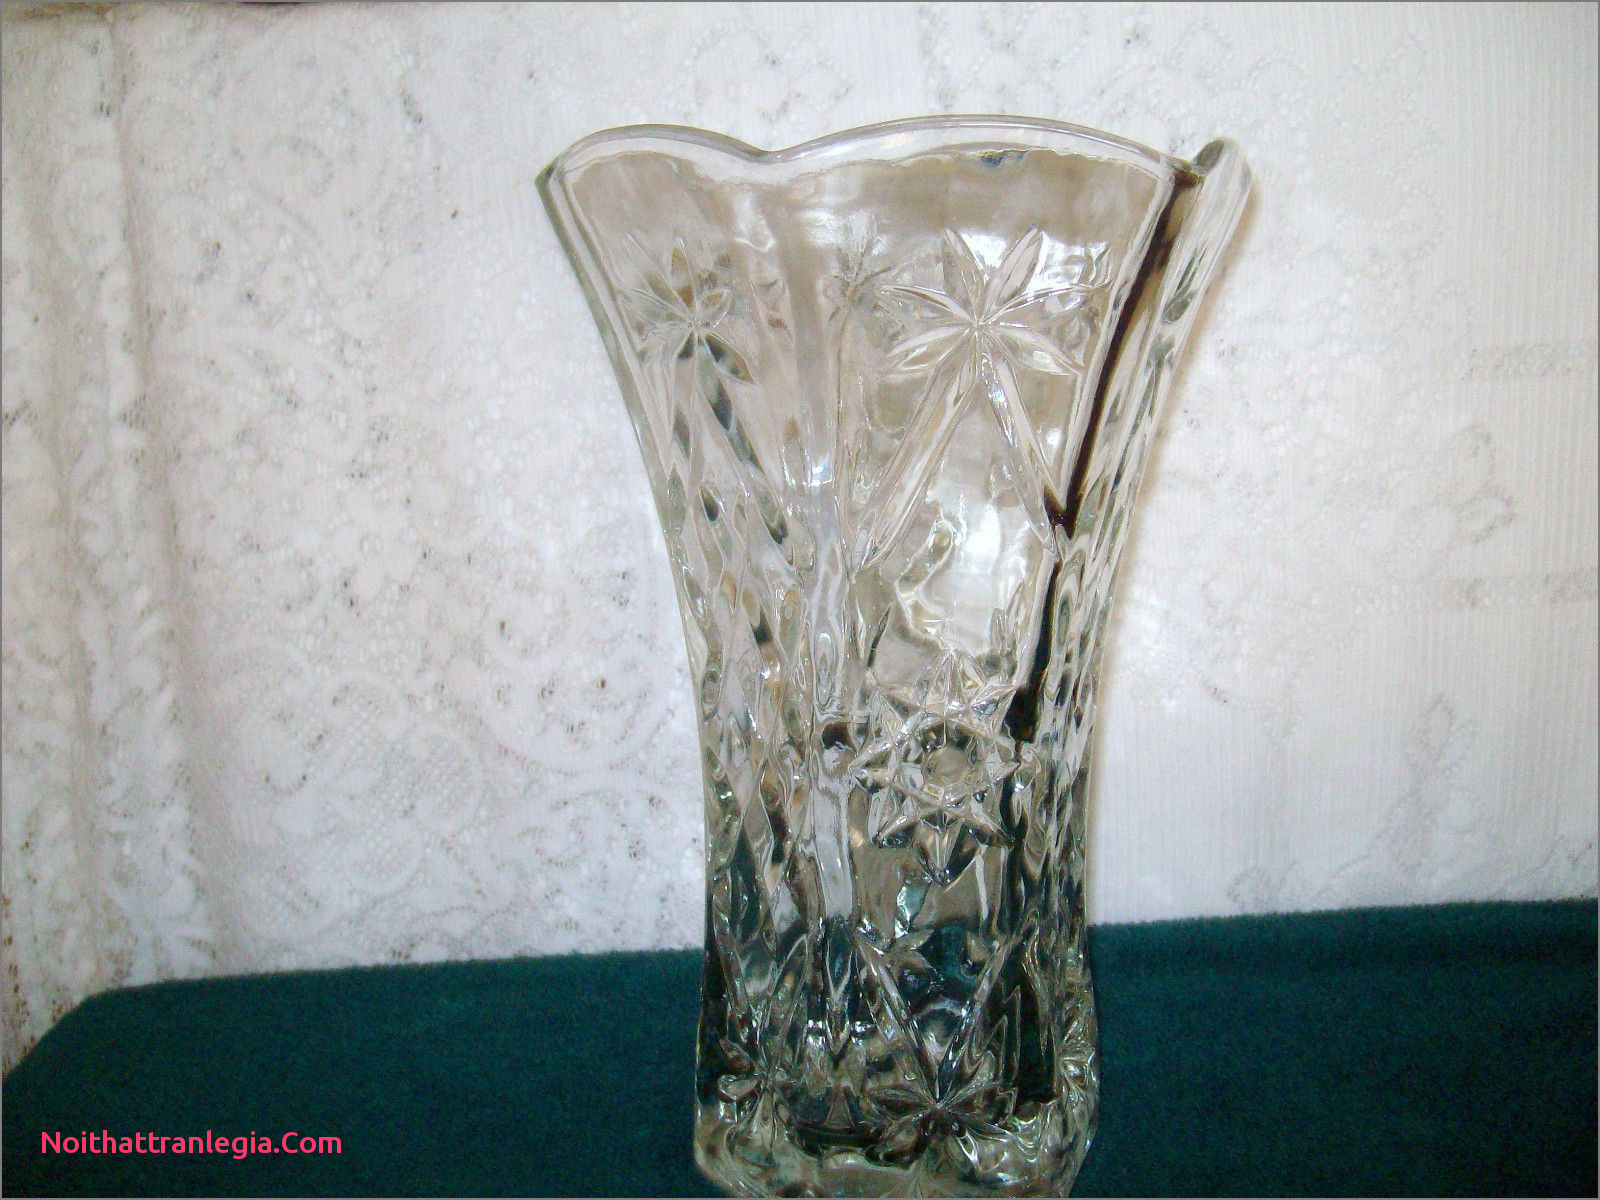 13 Stylish Ruby Cut Glass Vase 2024 free download ruby cut glass vase of 20 cut glass antique vase noithattranlegia vases design with vintage heavy depression cut glass vase 10 1 2 tall ruffled edges